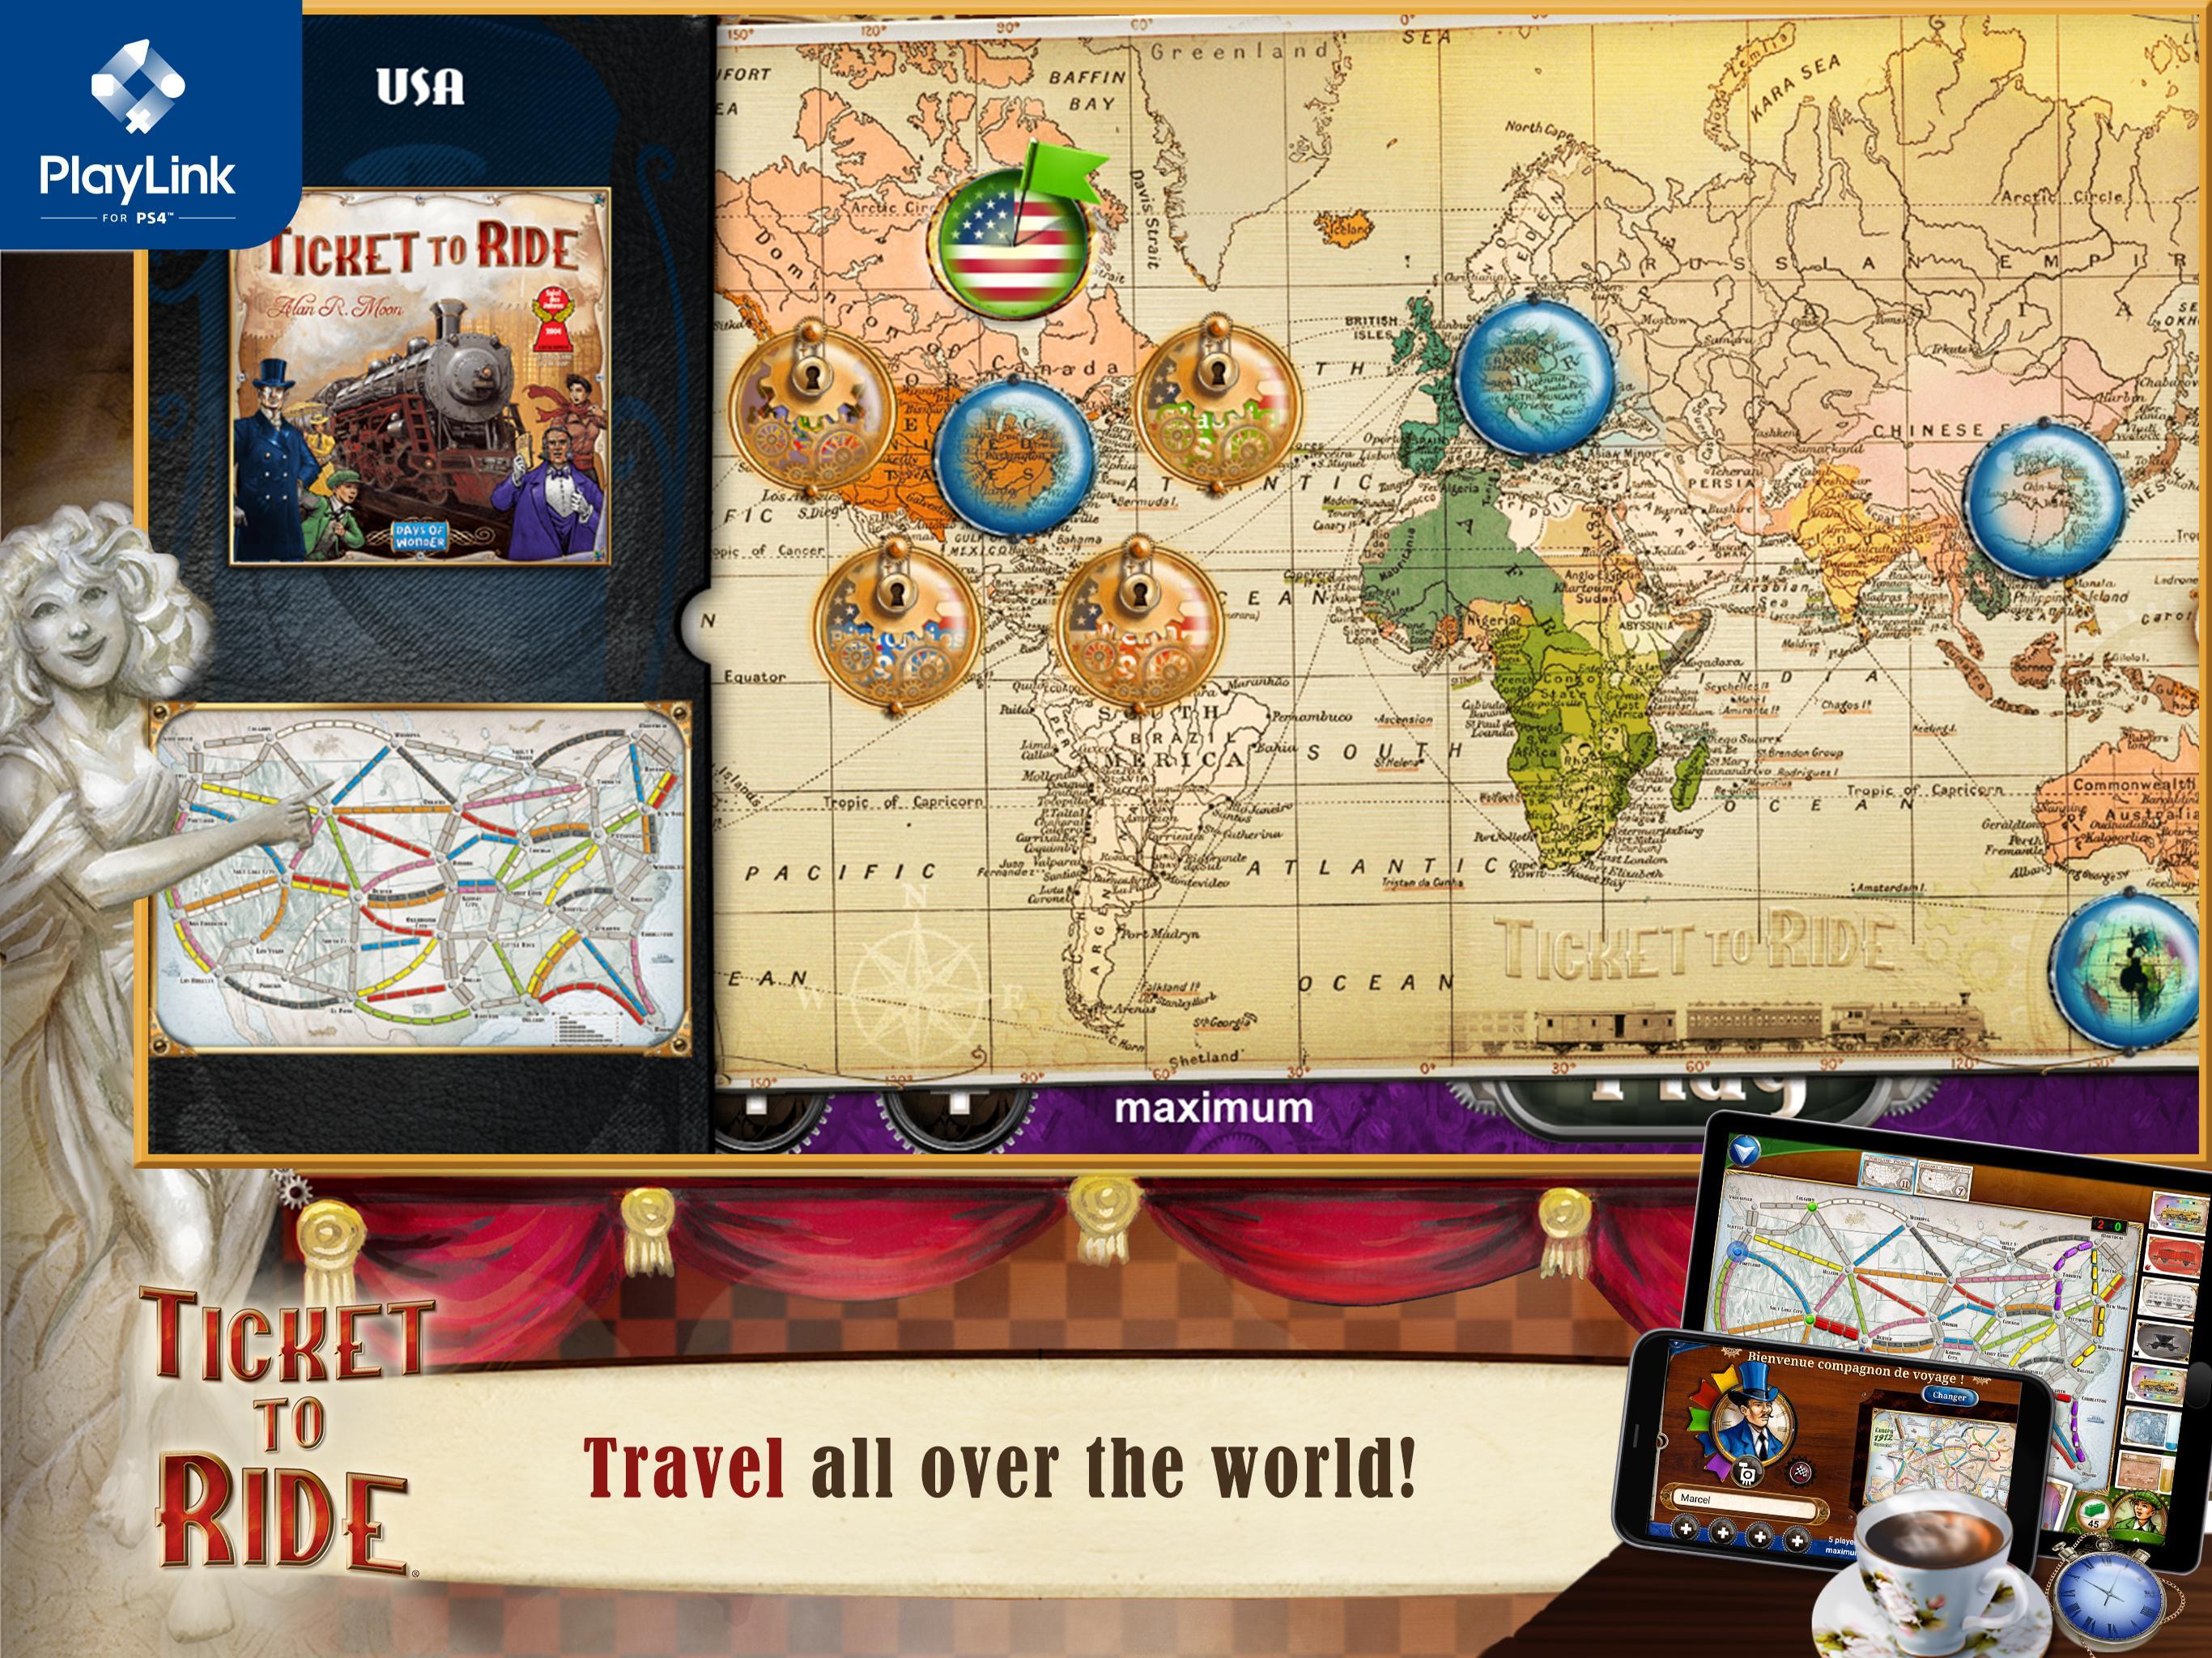 Ticket to Ride for PlayLink 2.7.2-6472-ceb1ea16 Screenshot 9